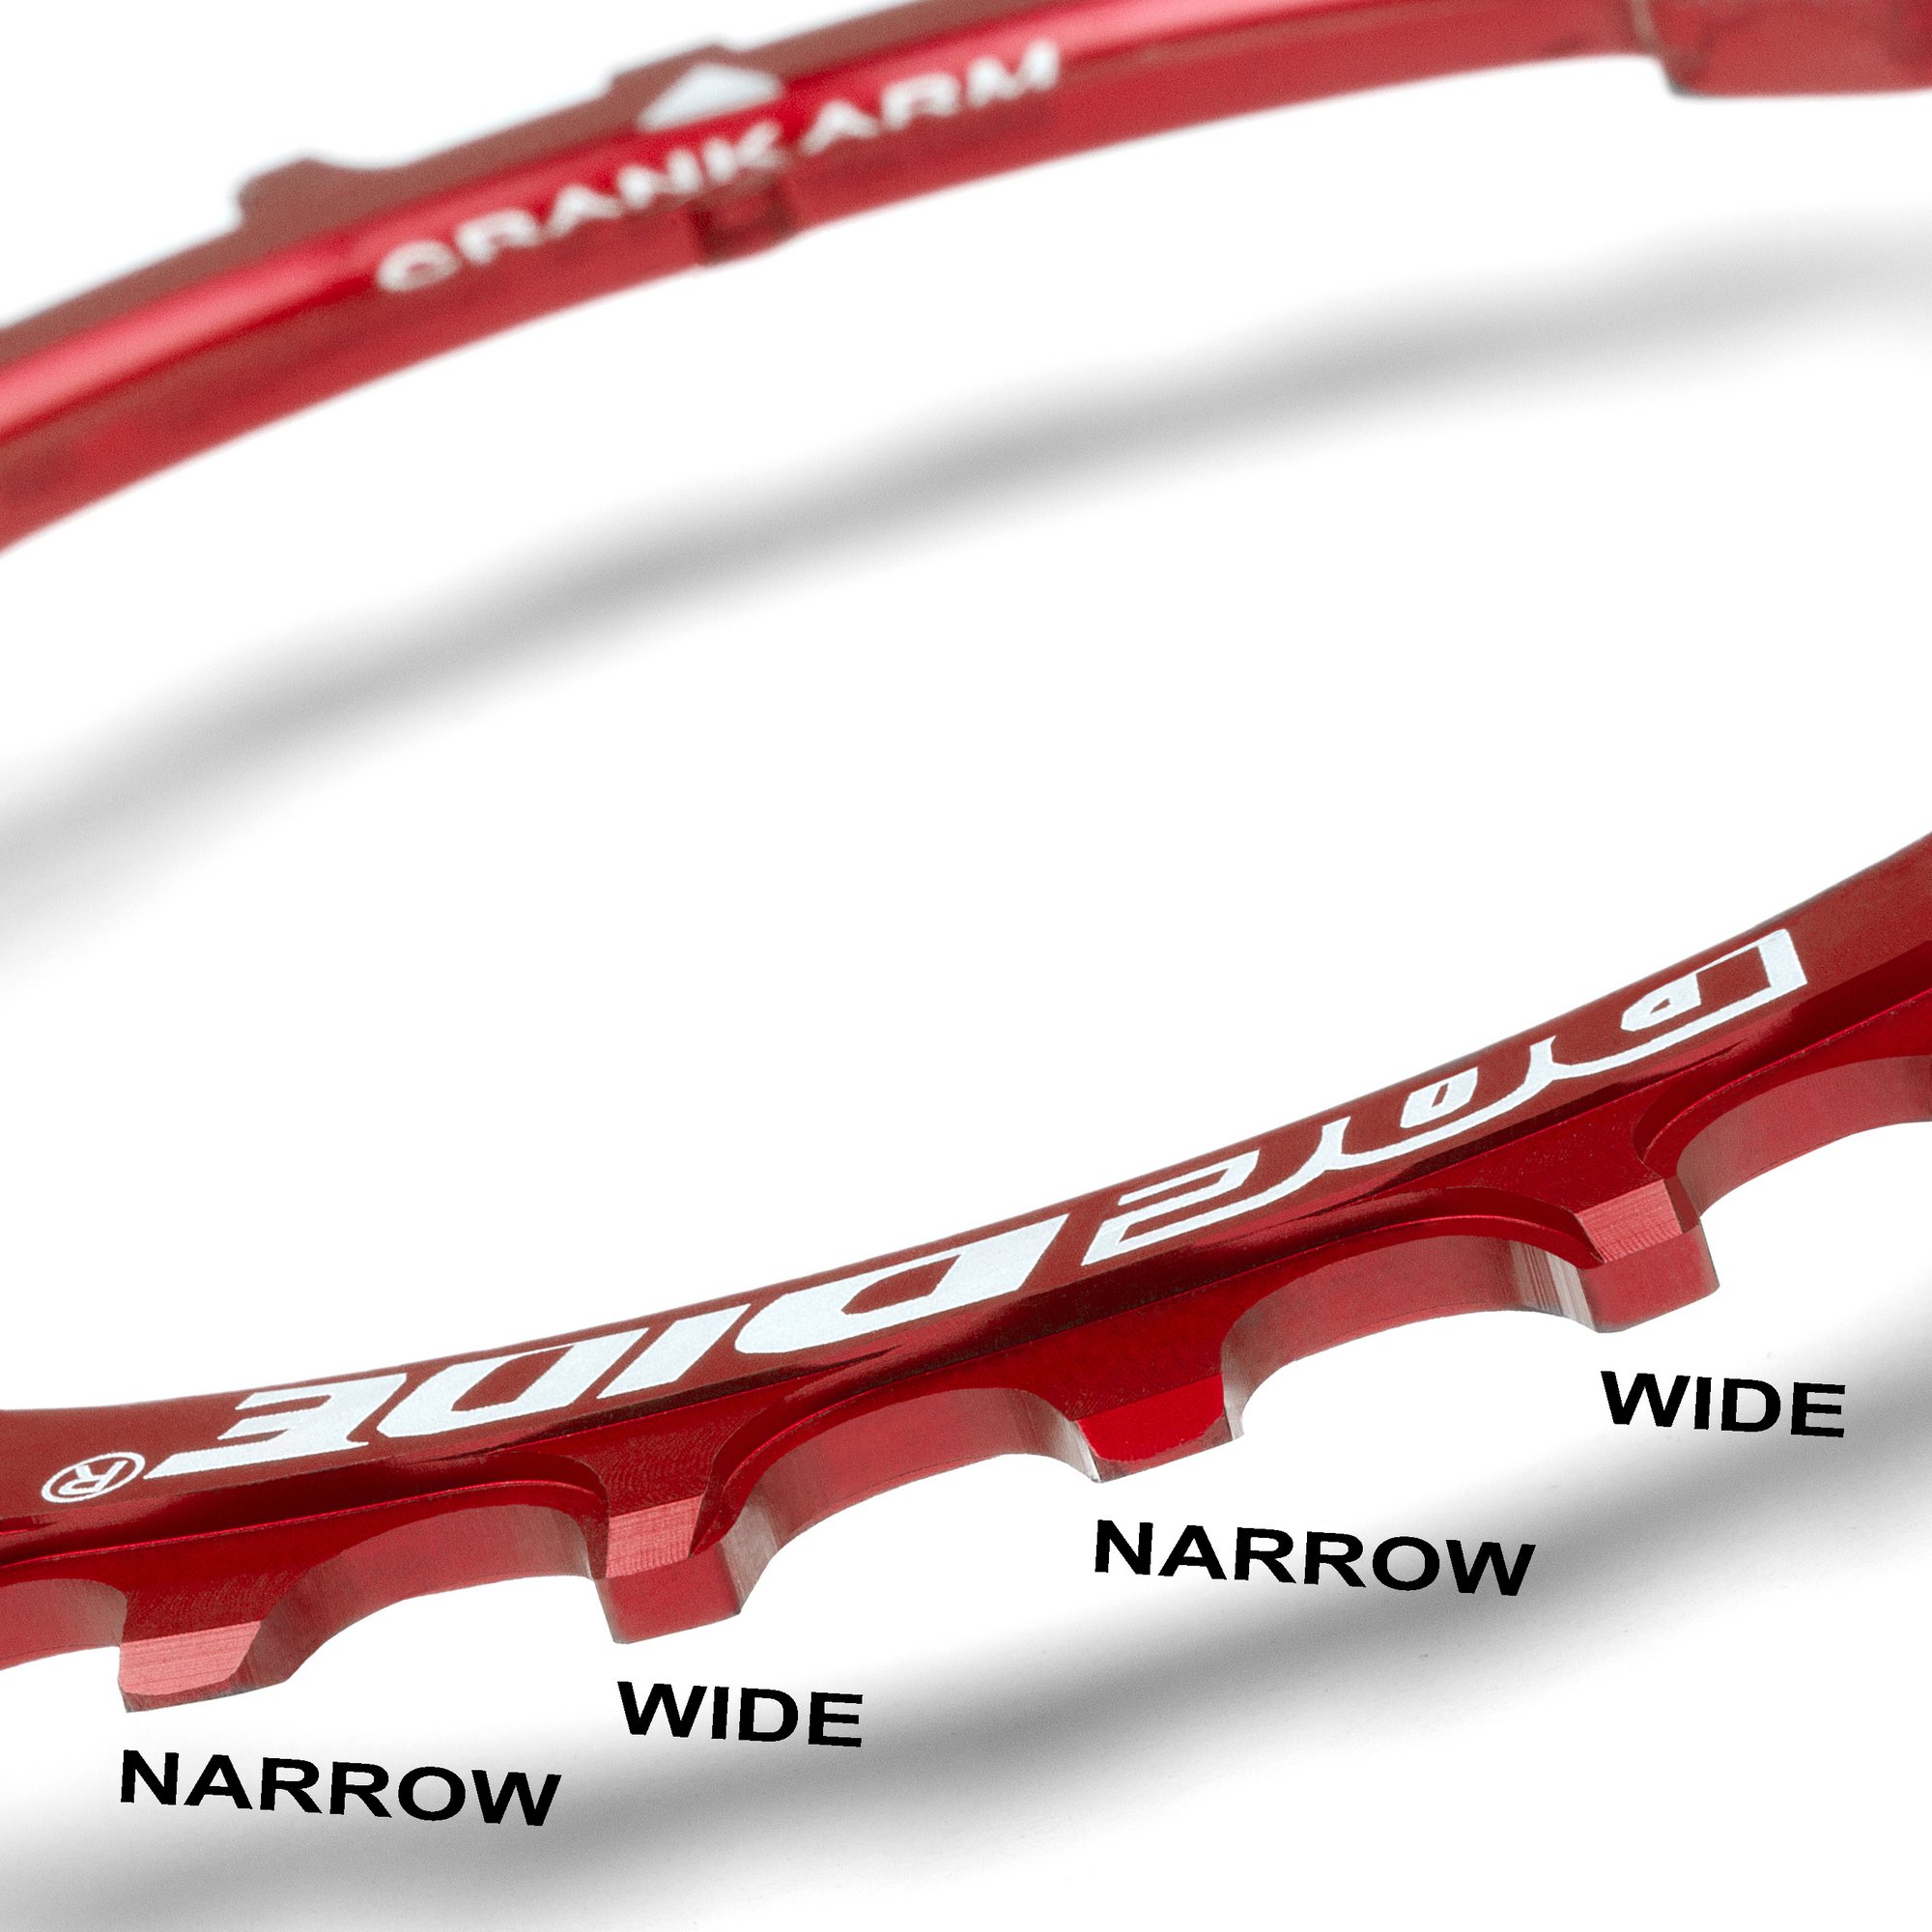 30T Narrow Wide Chainring 104 BCD Red Aluminum With 4 Red Aluminum Bolts By RocRide For 9/10/11 Speed. - image 4 of 5